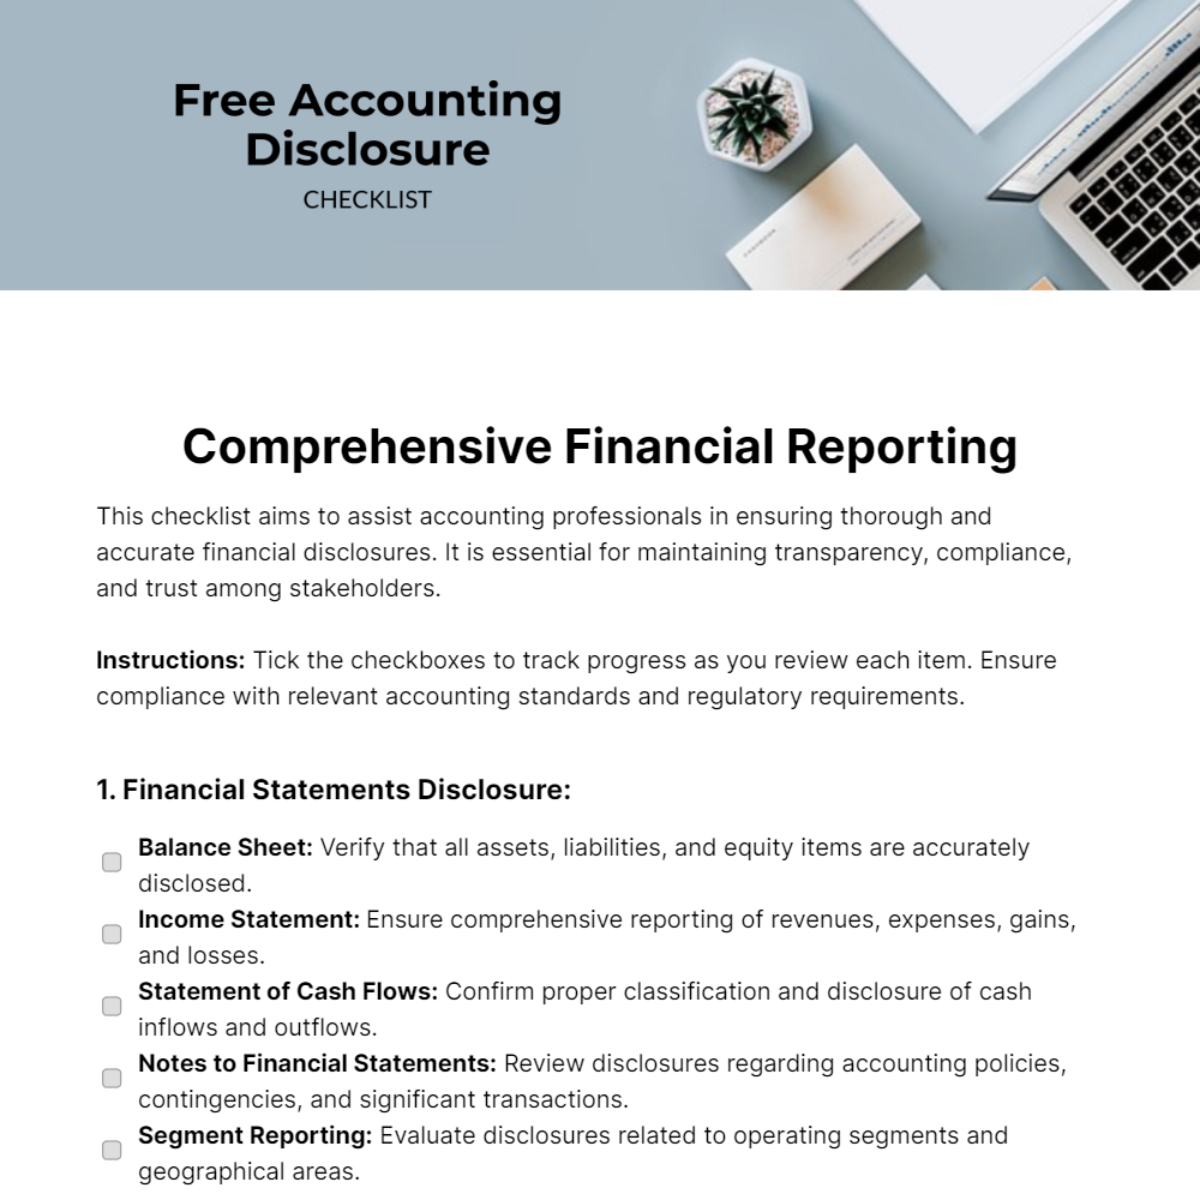 Free Accounting Disclosure Checklist Template